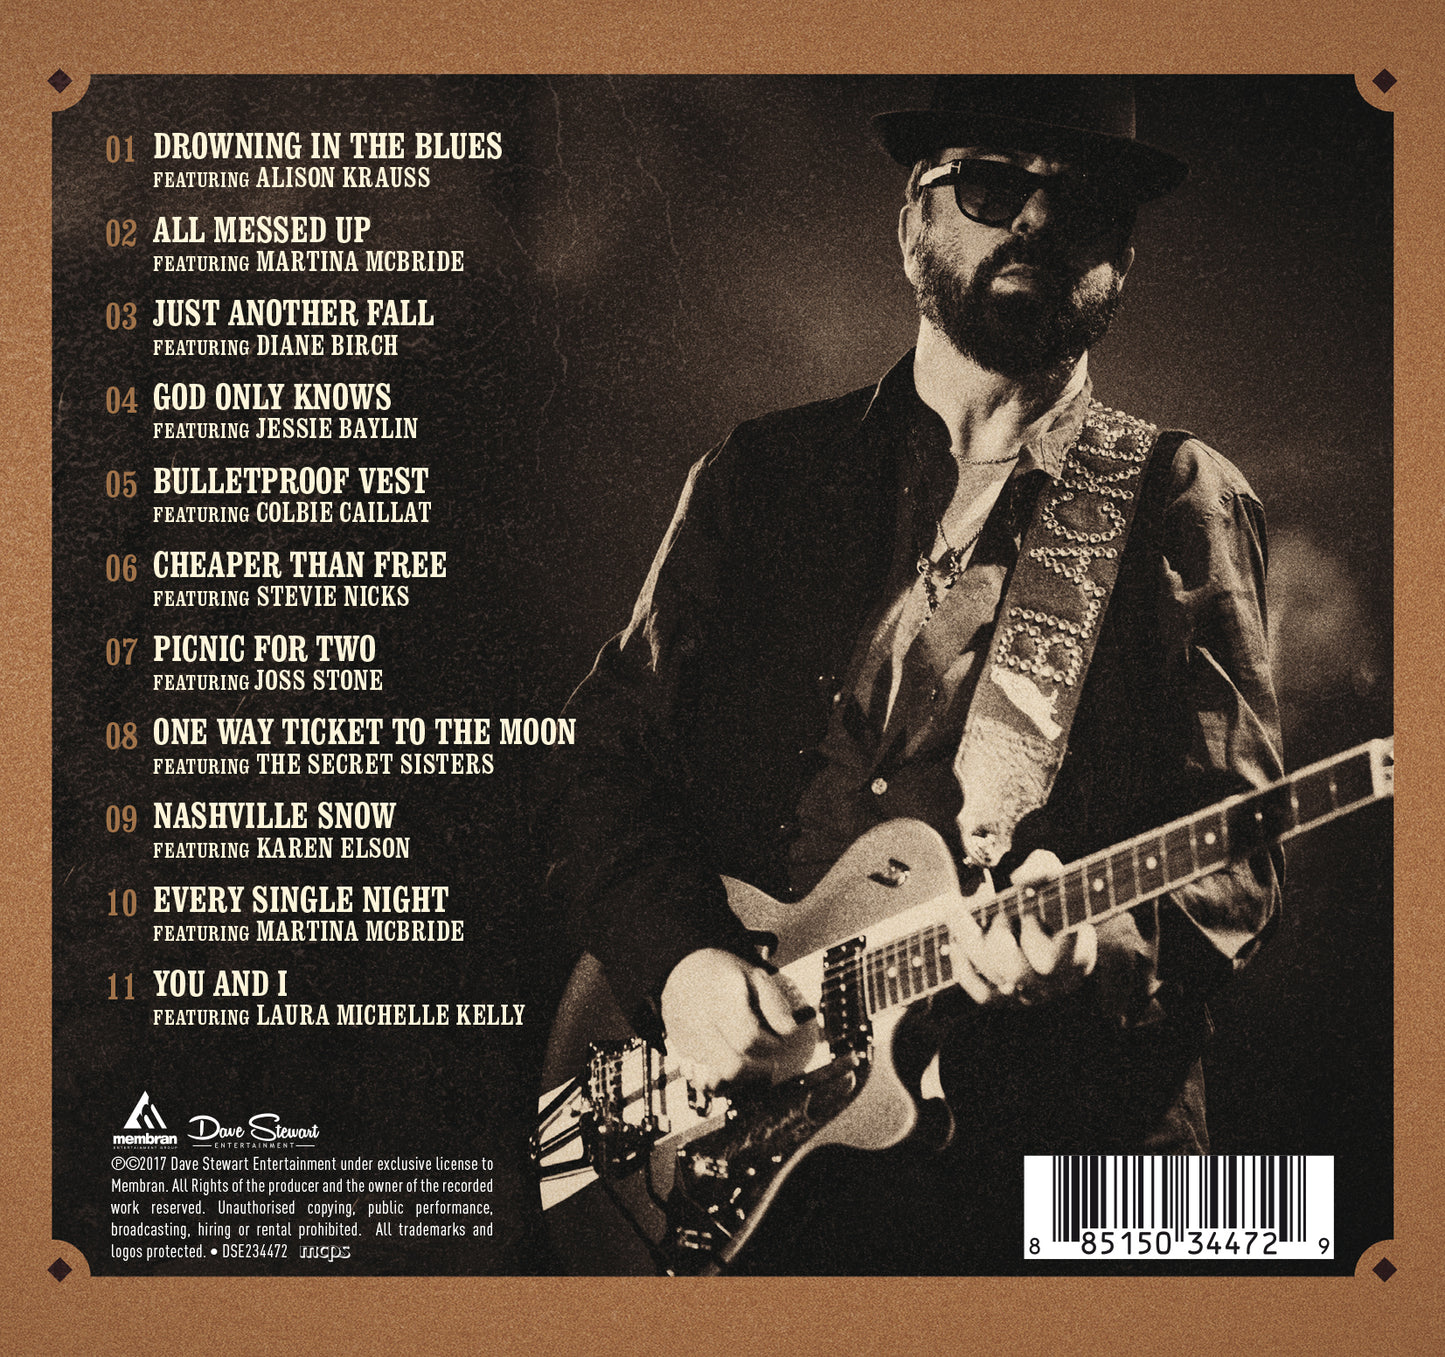 Dave Stewart - Nashville Sessions - The Duets, Vol 1 - CD